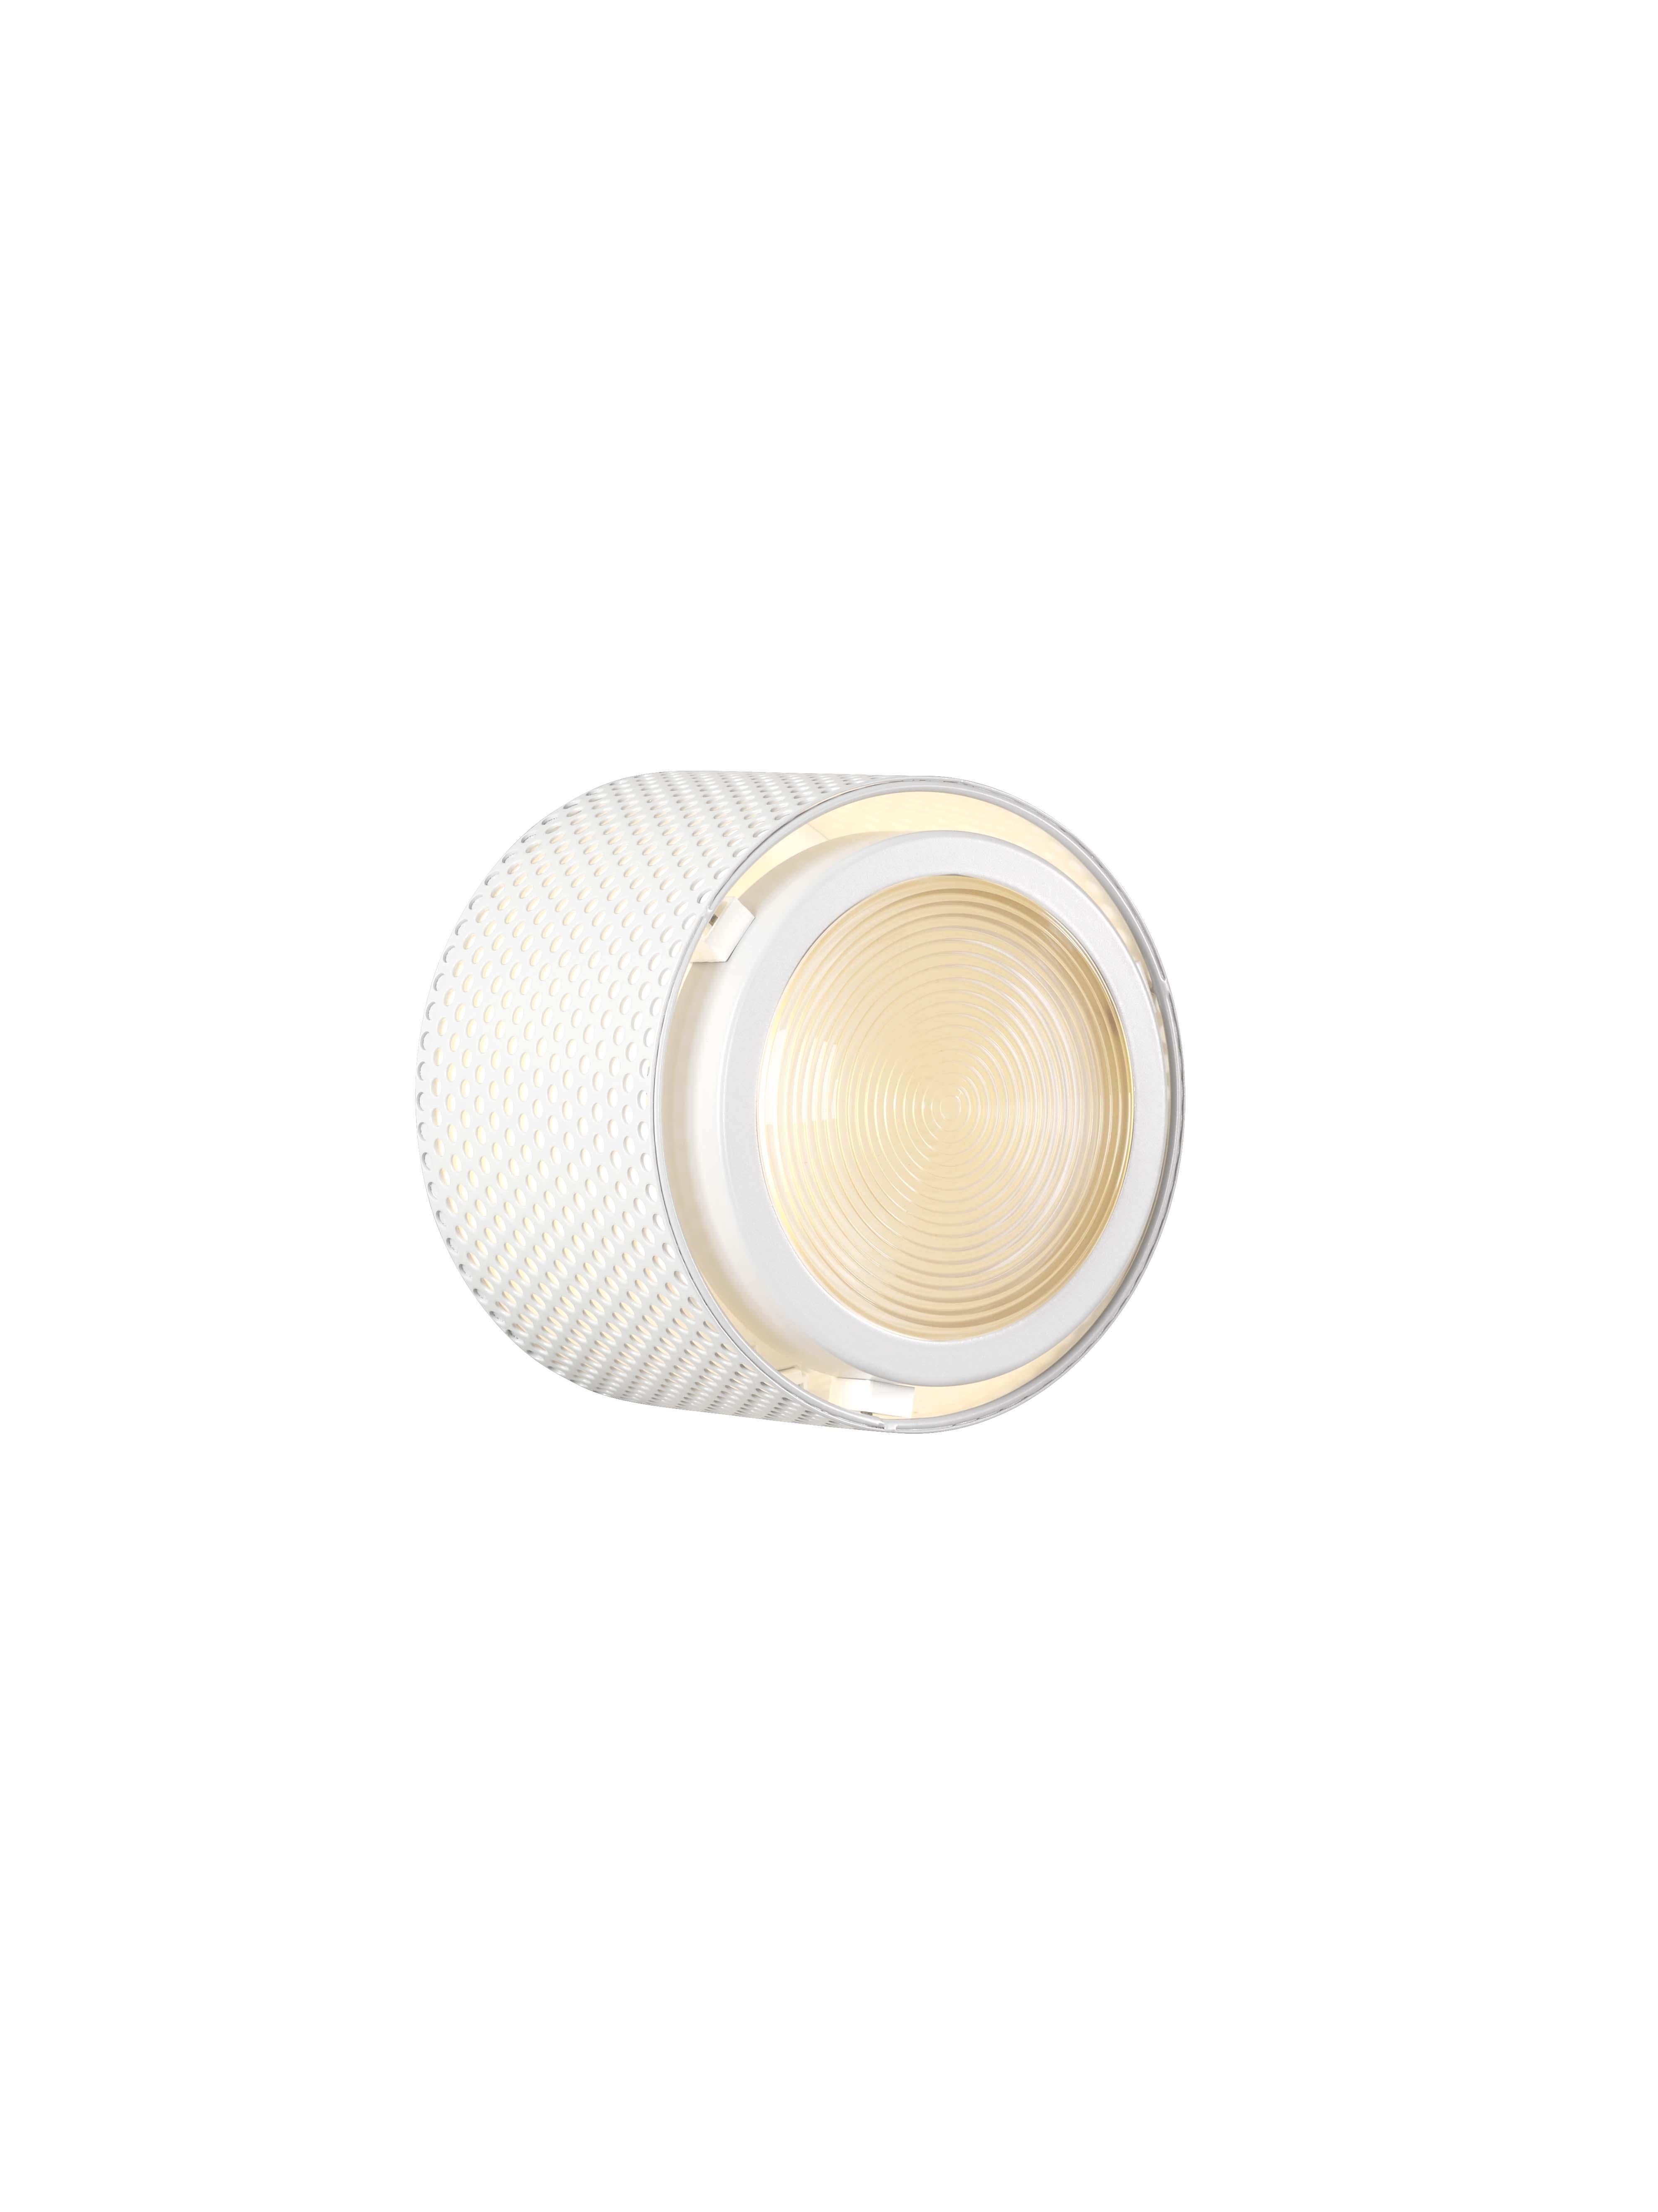 Small Pierre Guariche 'G13' Wall or Ceiling Light for Sammode Studio in White For Sale 3